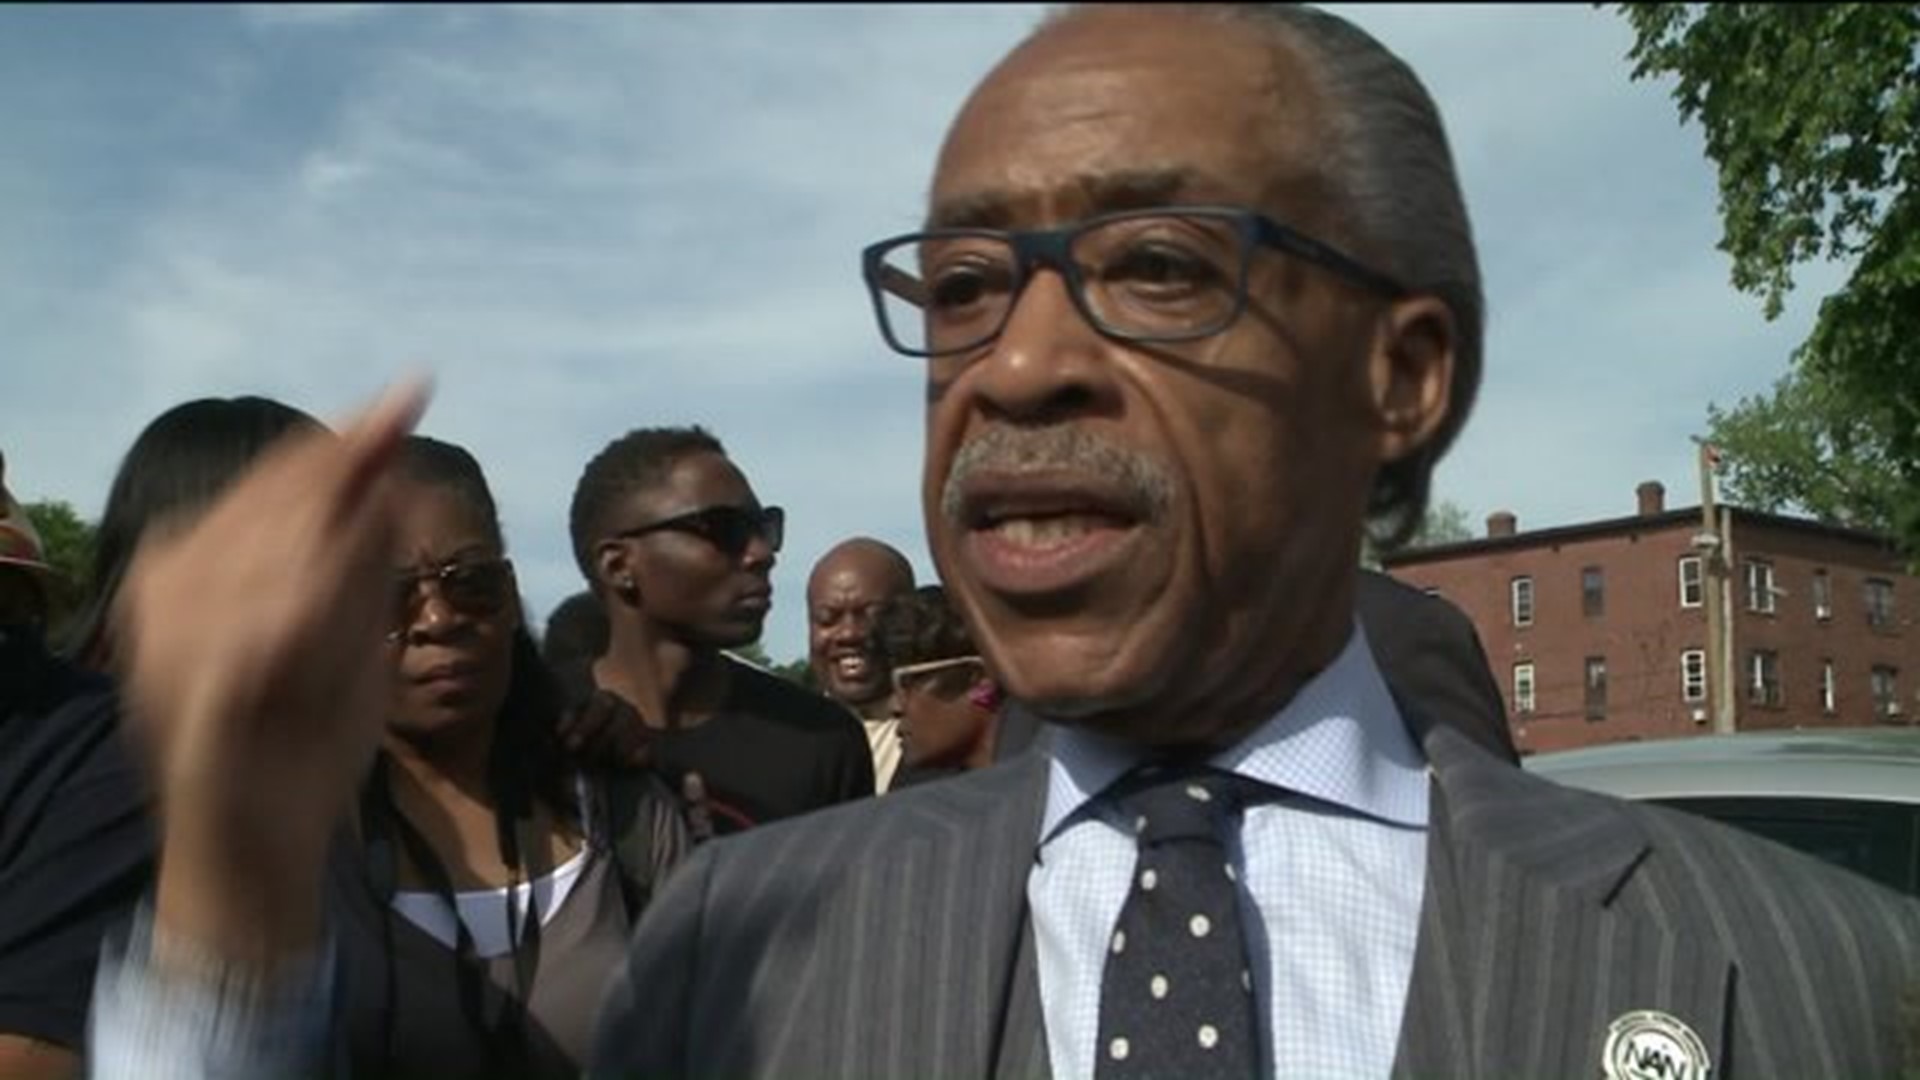 Sharpton leads Hartford march and rally